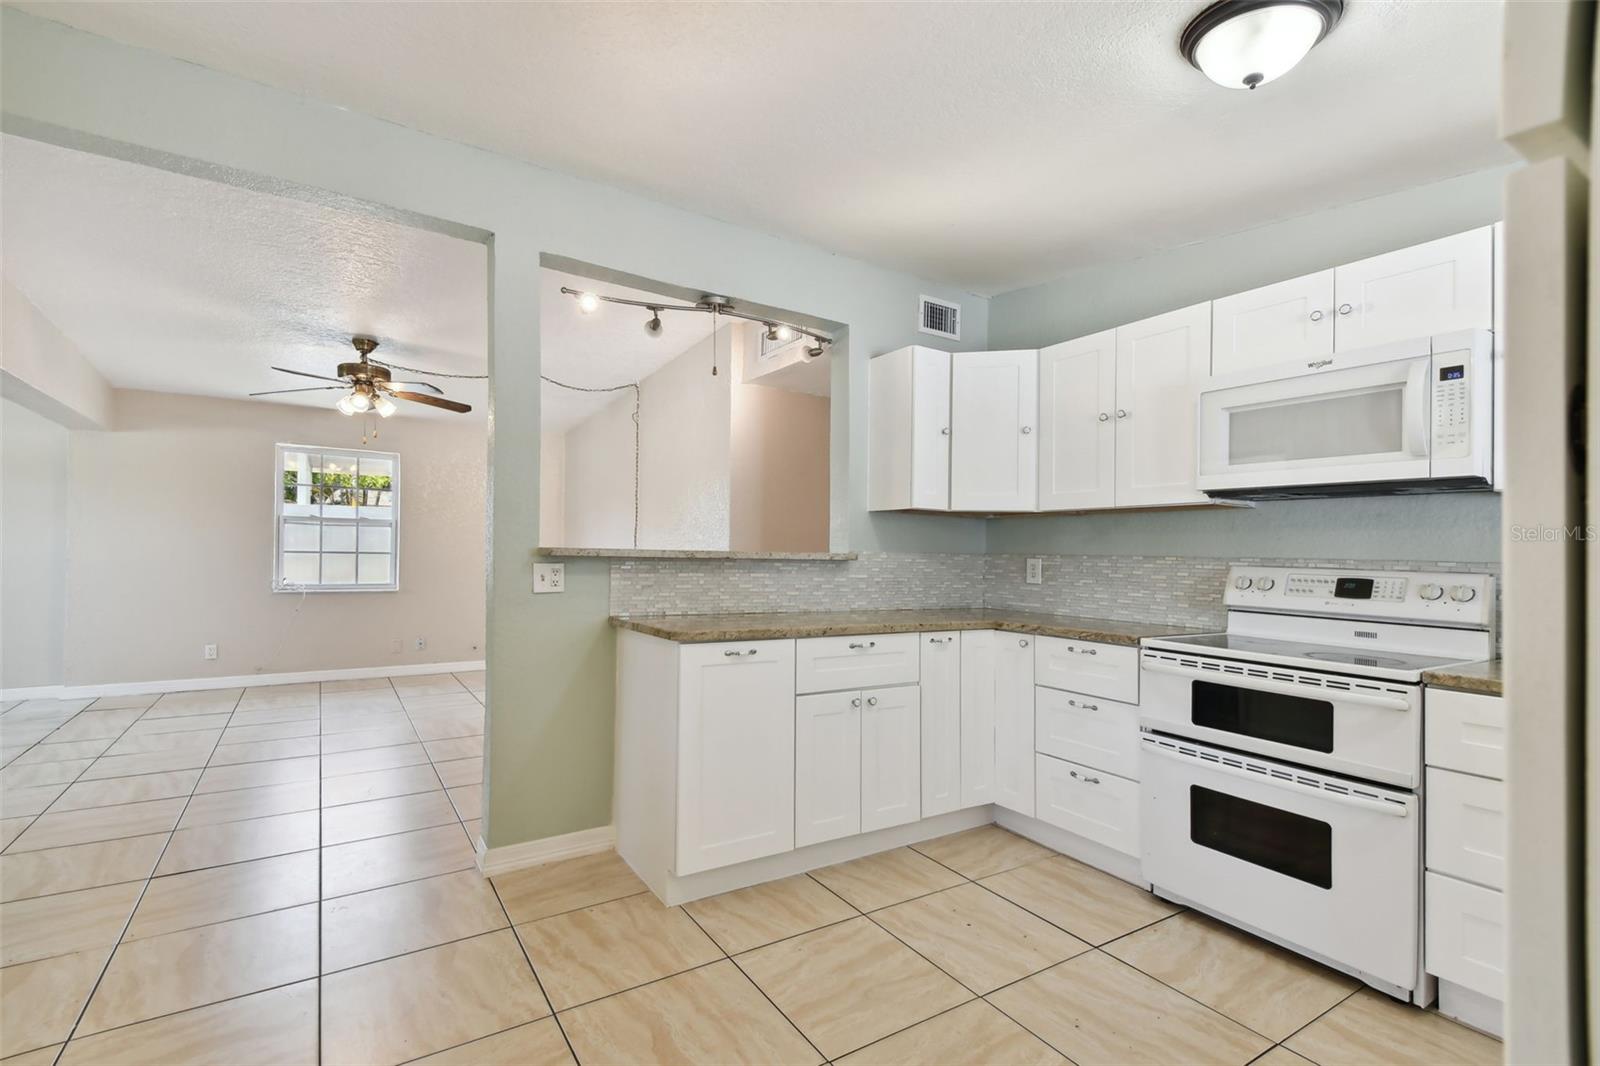 Plenty of kitchen cabinets and counter space to suit the pickiest cooks. Built-in pantry.